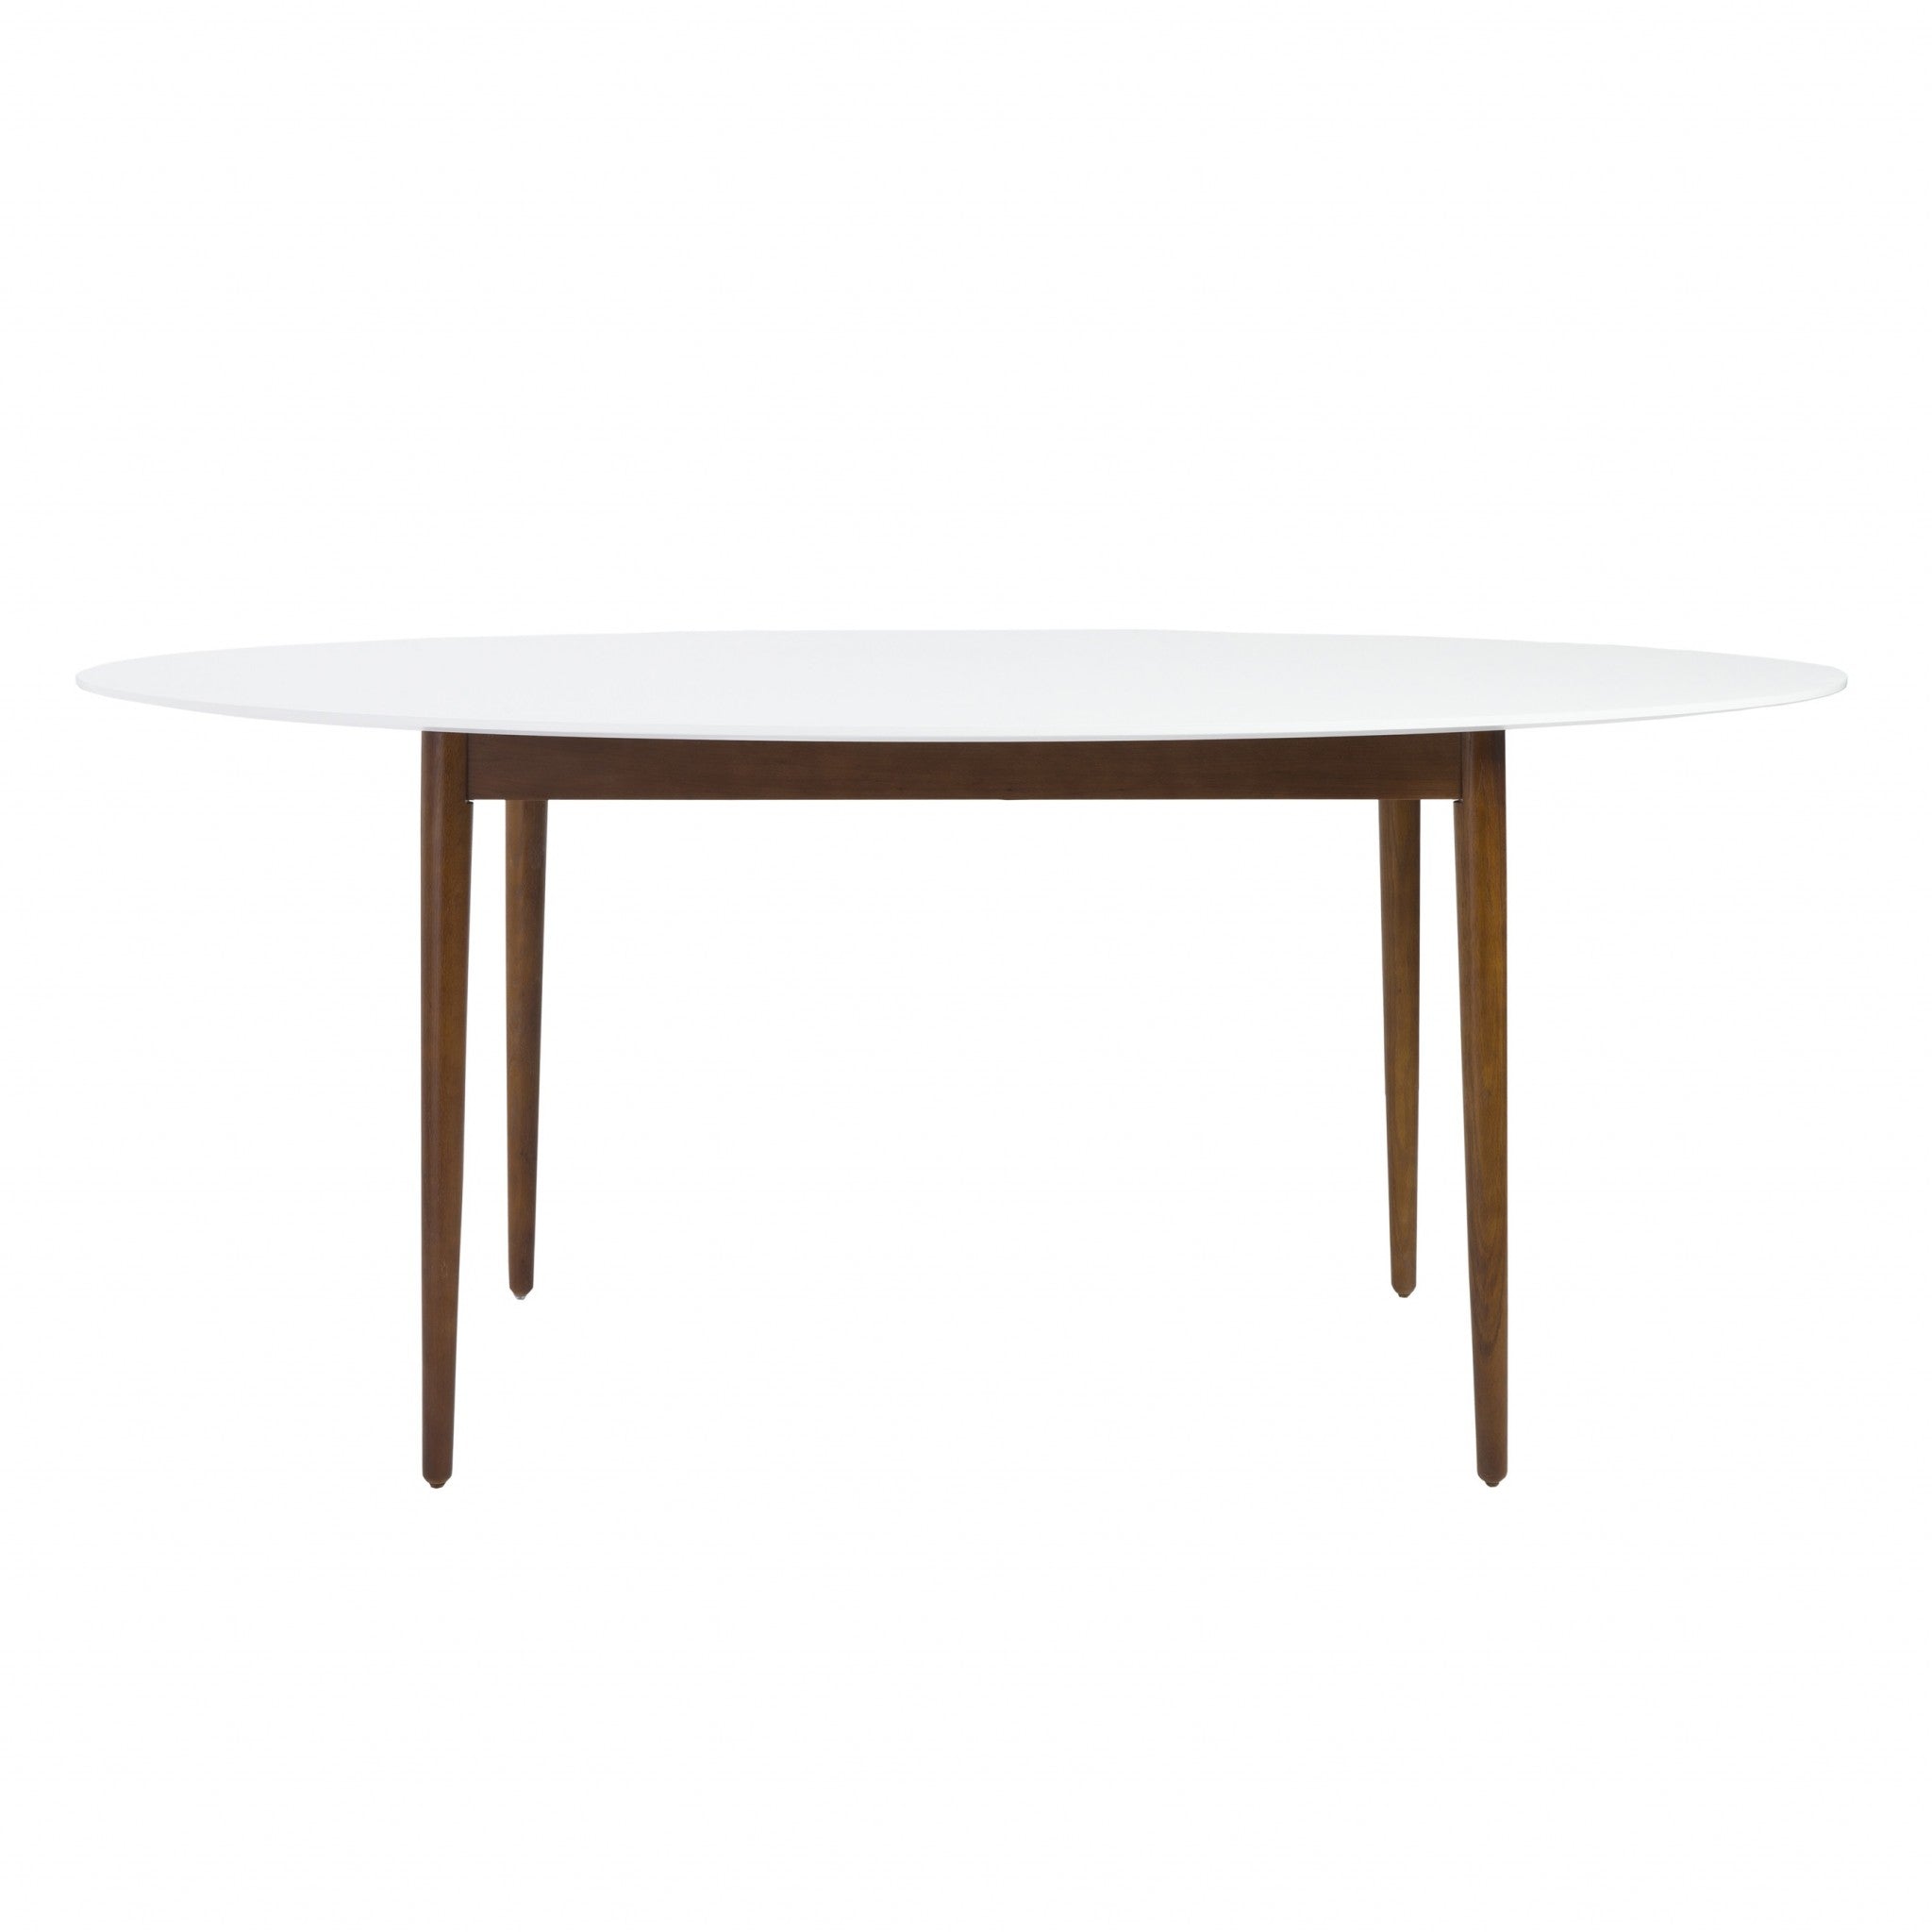 63" White And Brown Oval Dining Table